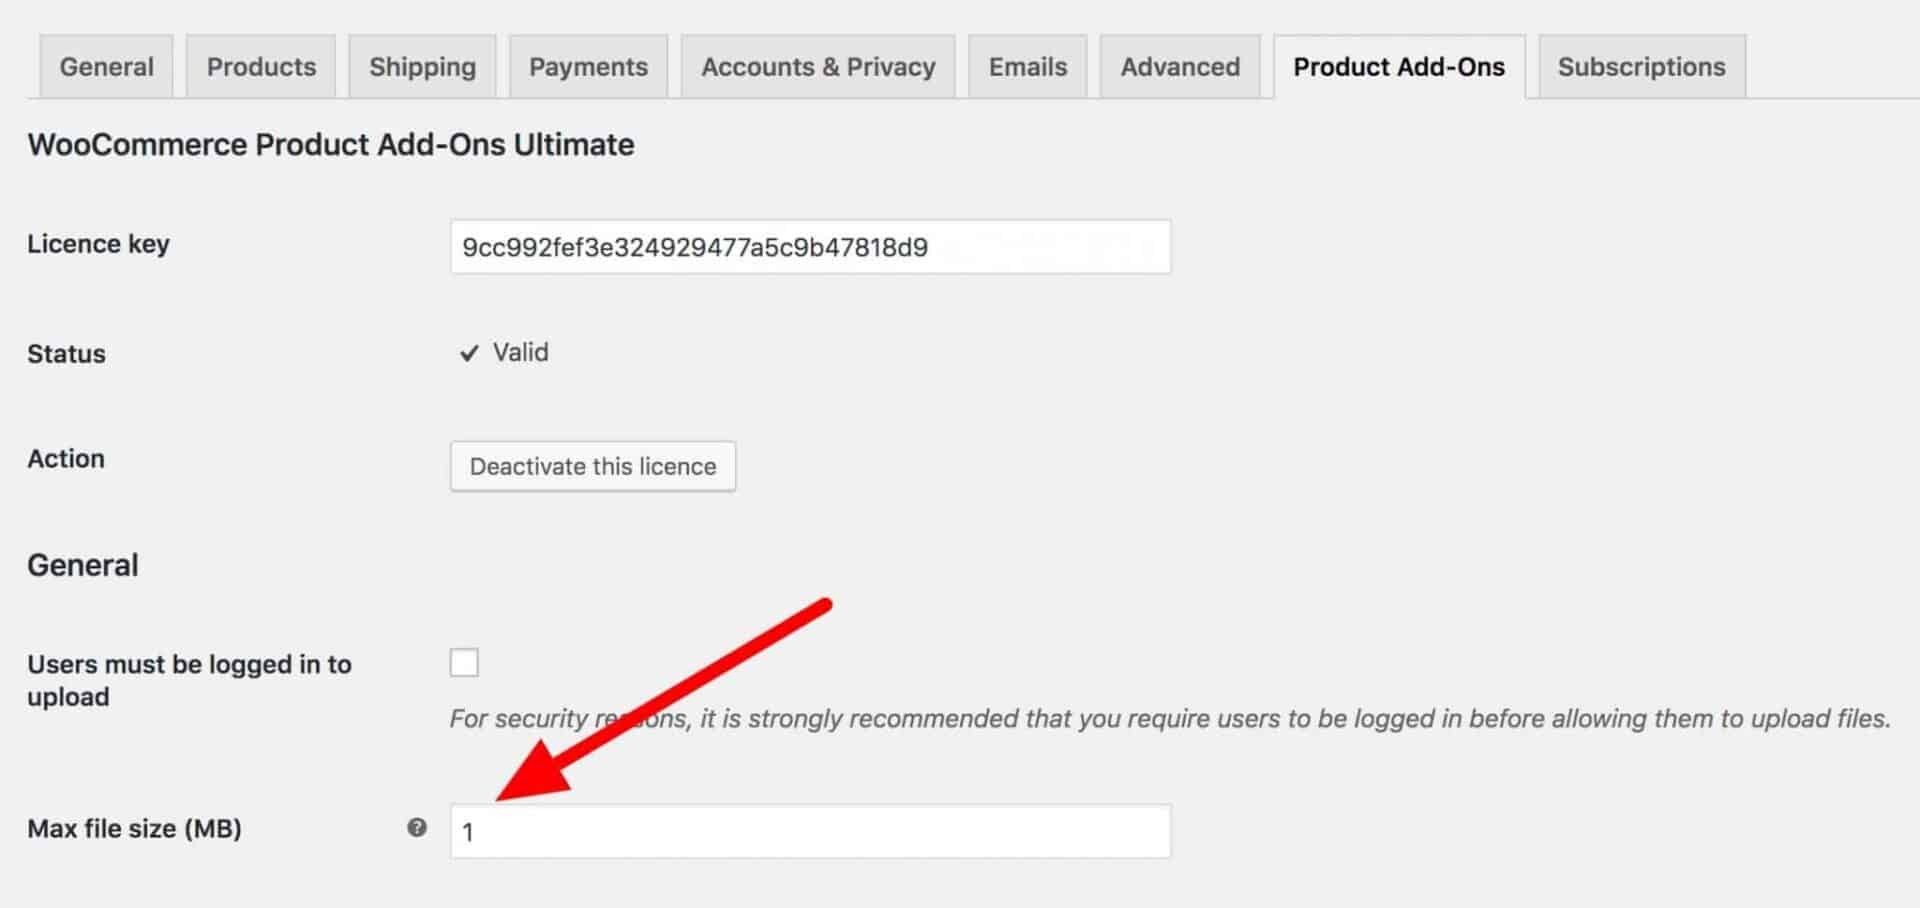 The WooCommerce Product Add-Ons screen, showing the Max file size (MB) field.